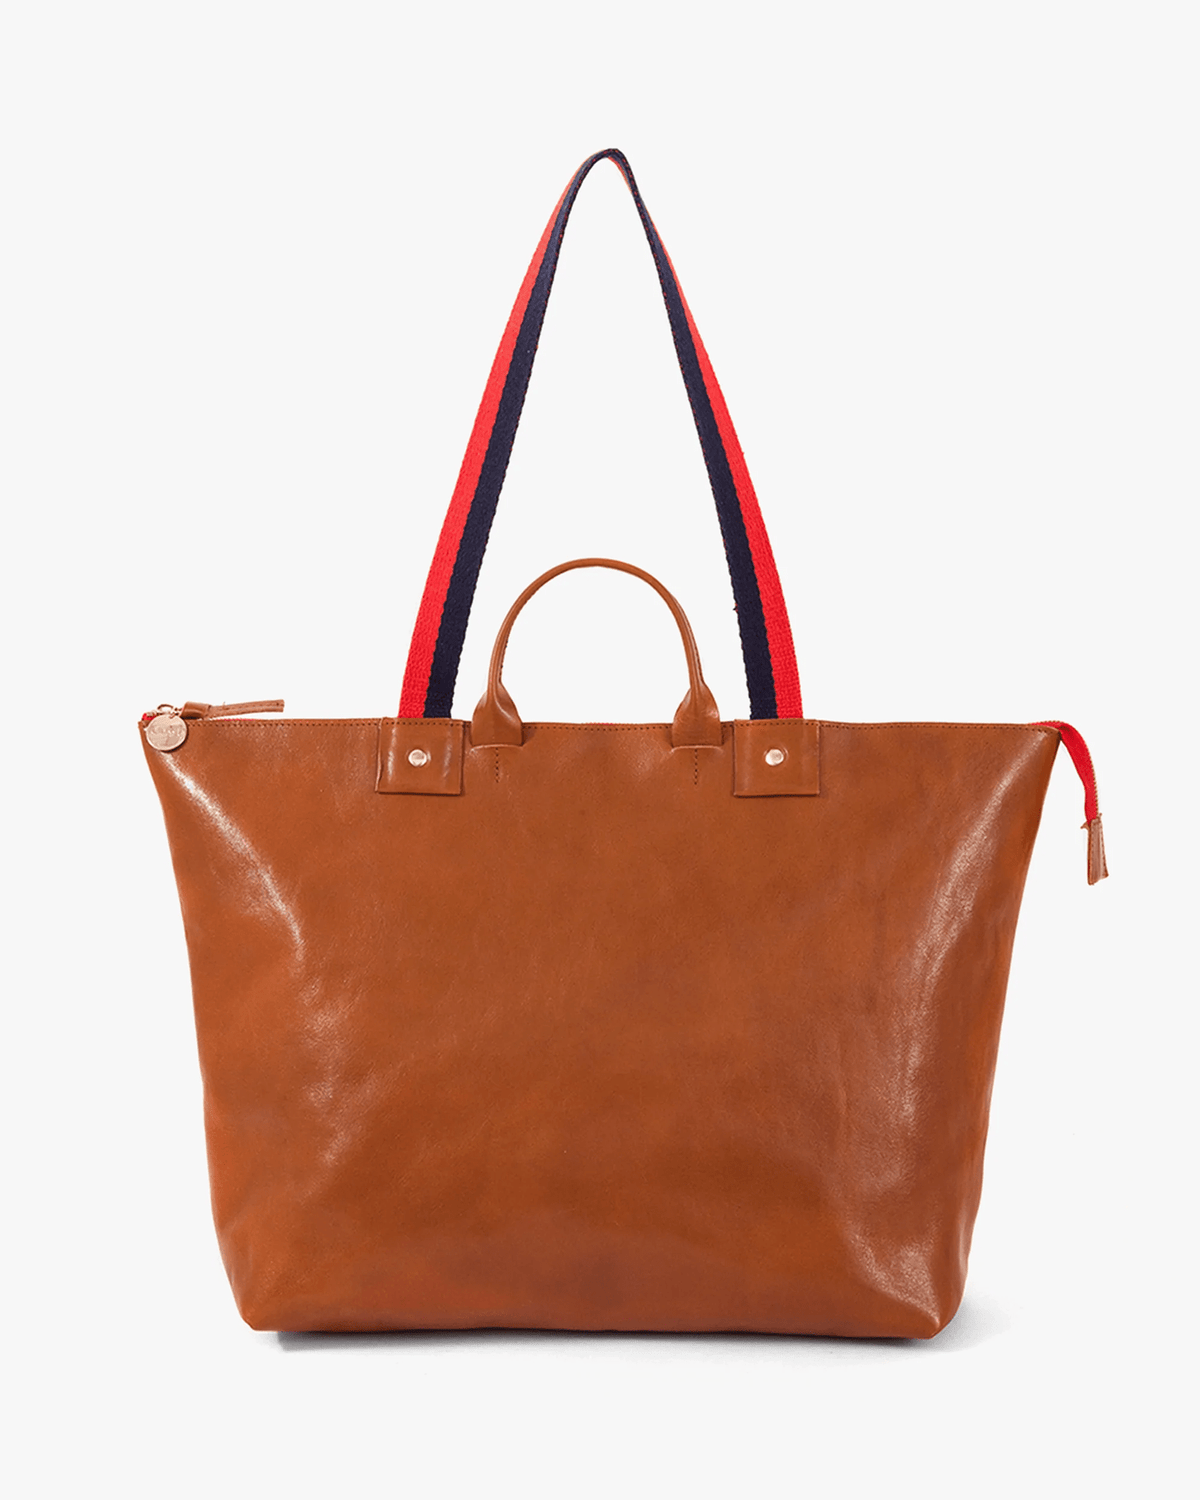 Now you can shop the latest collection from Le Zip Sac in Rustic Miel w/ 2  Tone Webbing Clare V.